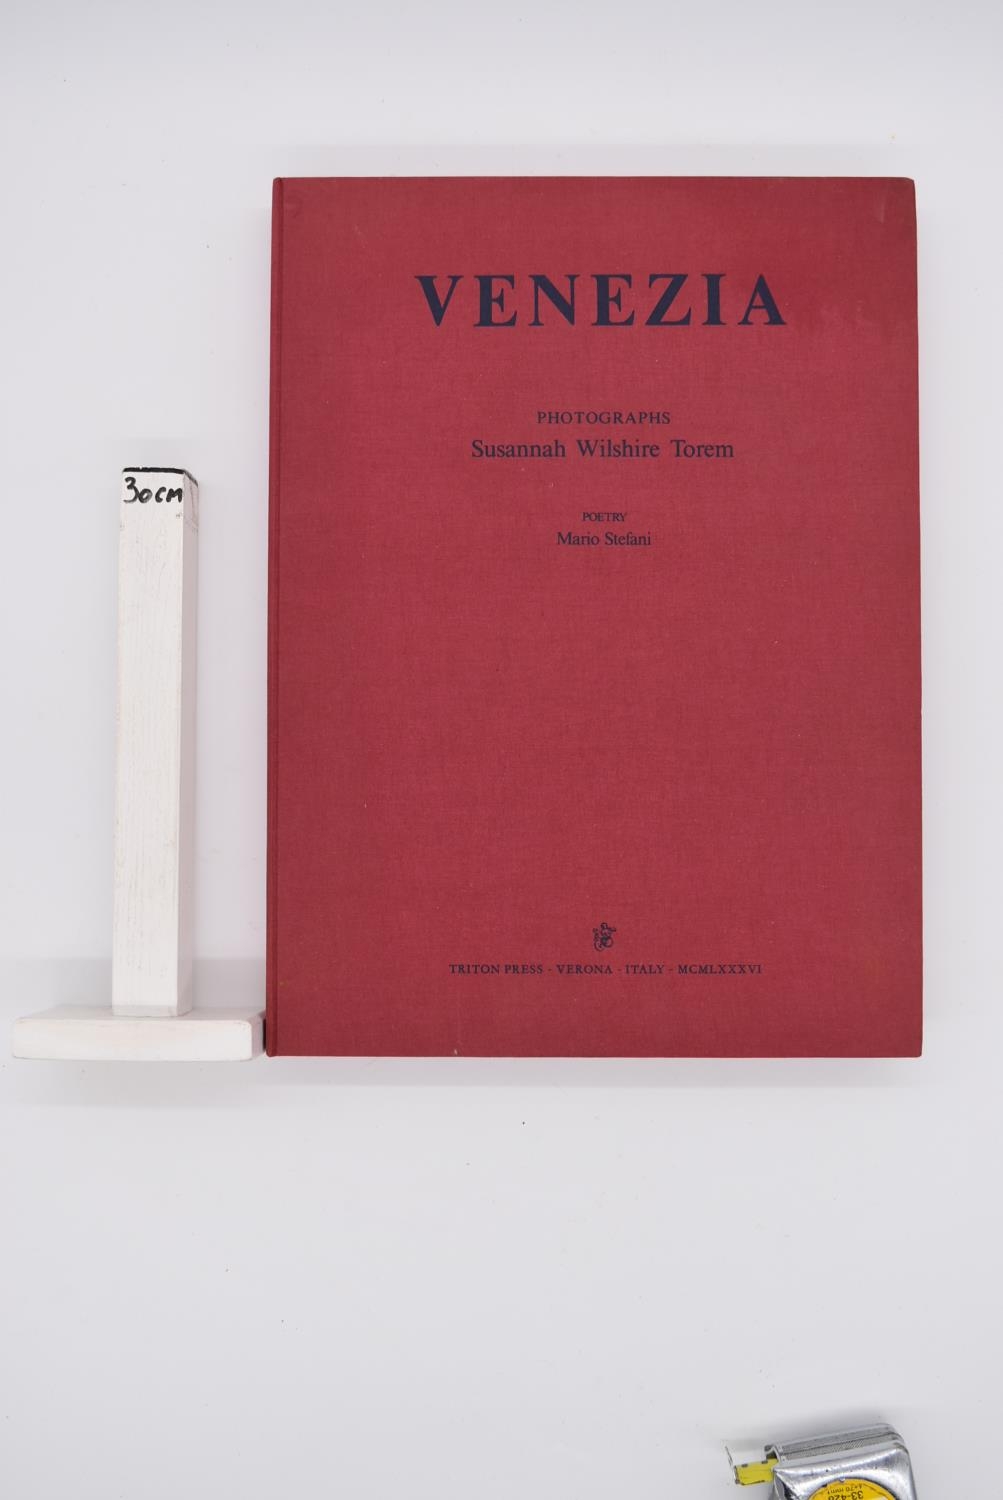 Susannah Wilshire Torem, Venezia, a photograph book together with poems by Mario Stefani, - Image 5 of 5